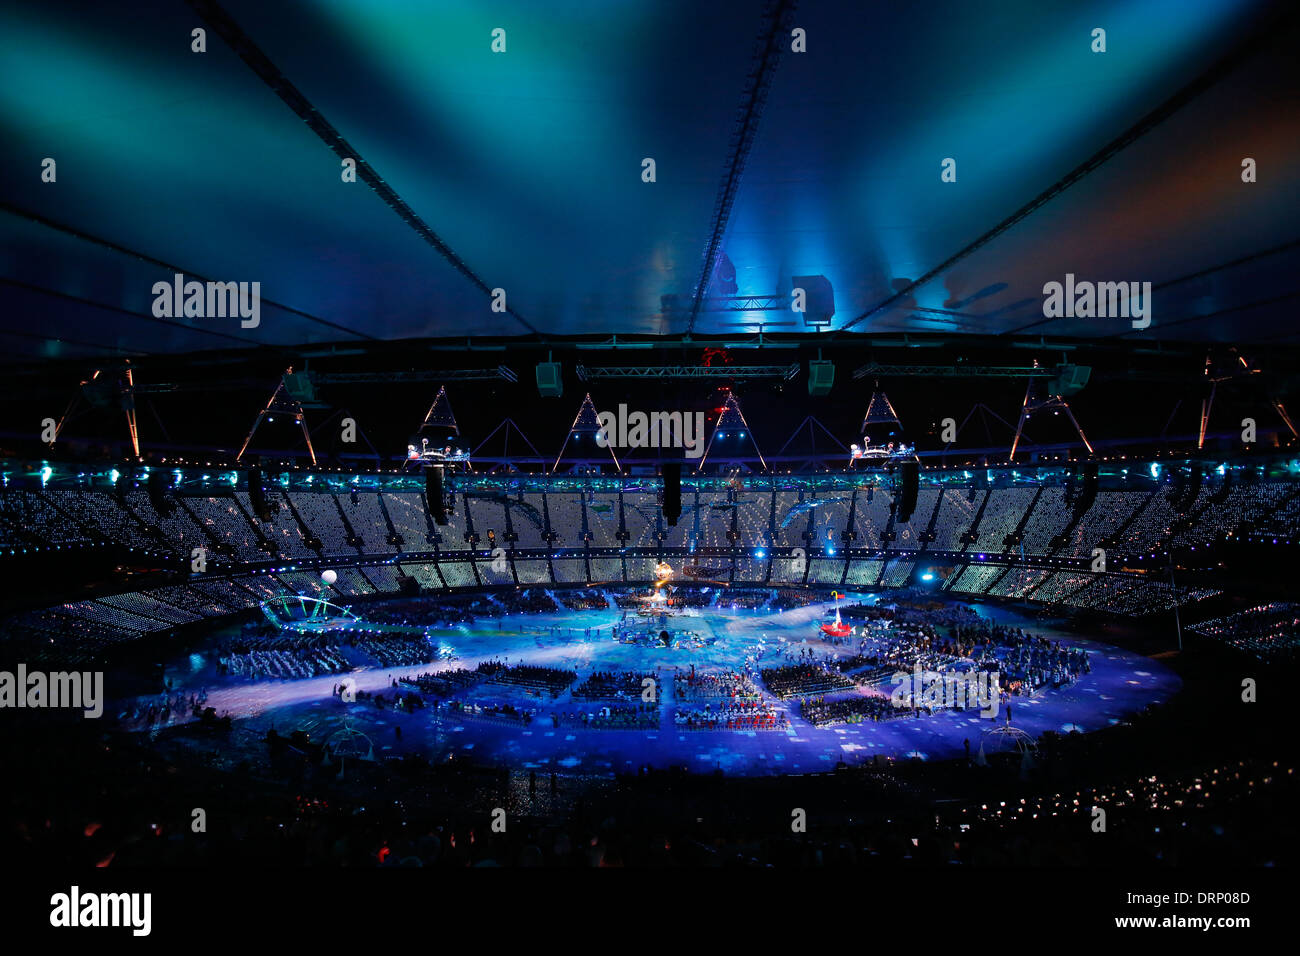 Performers in the Olympic Stadium during the opening ceremony of the London 2012 Paralympic Games Stock Photo